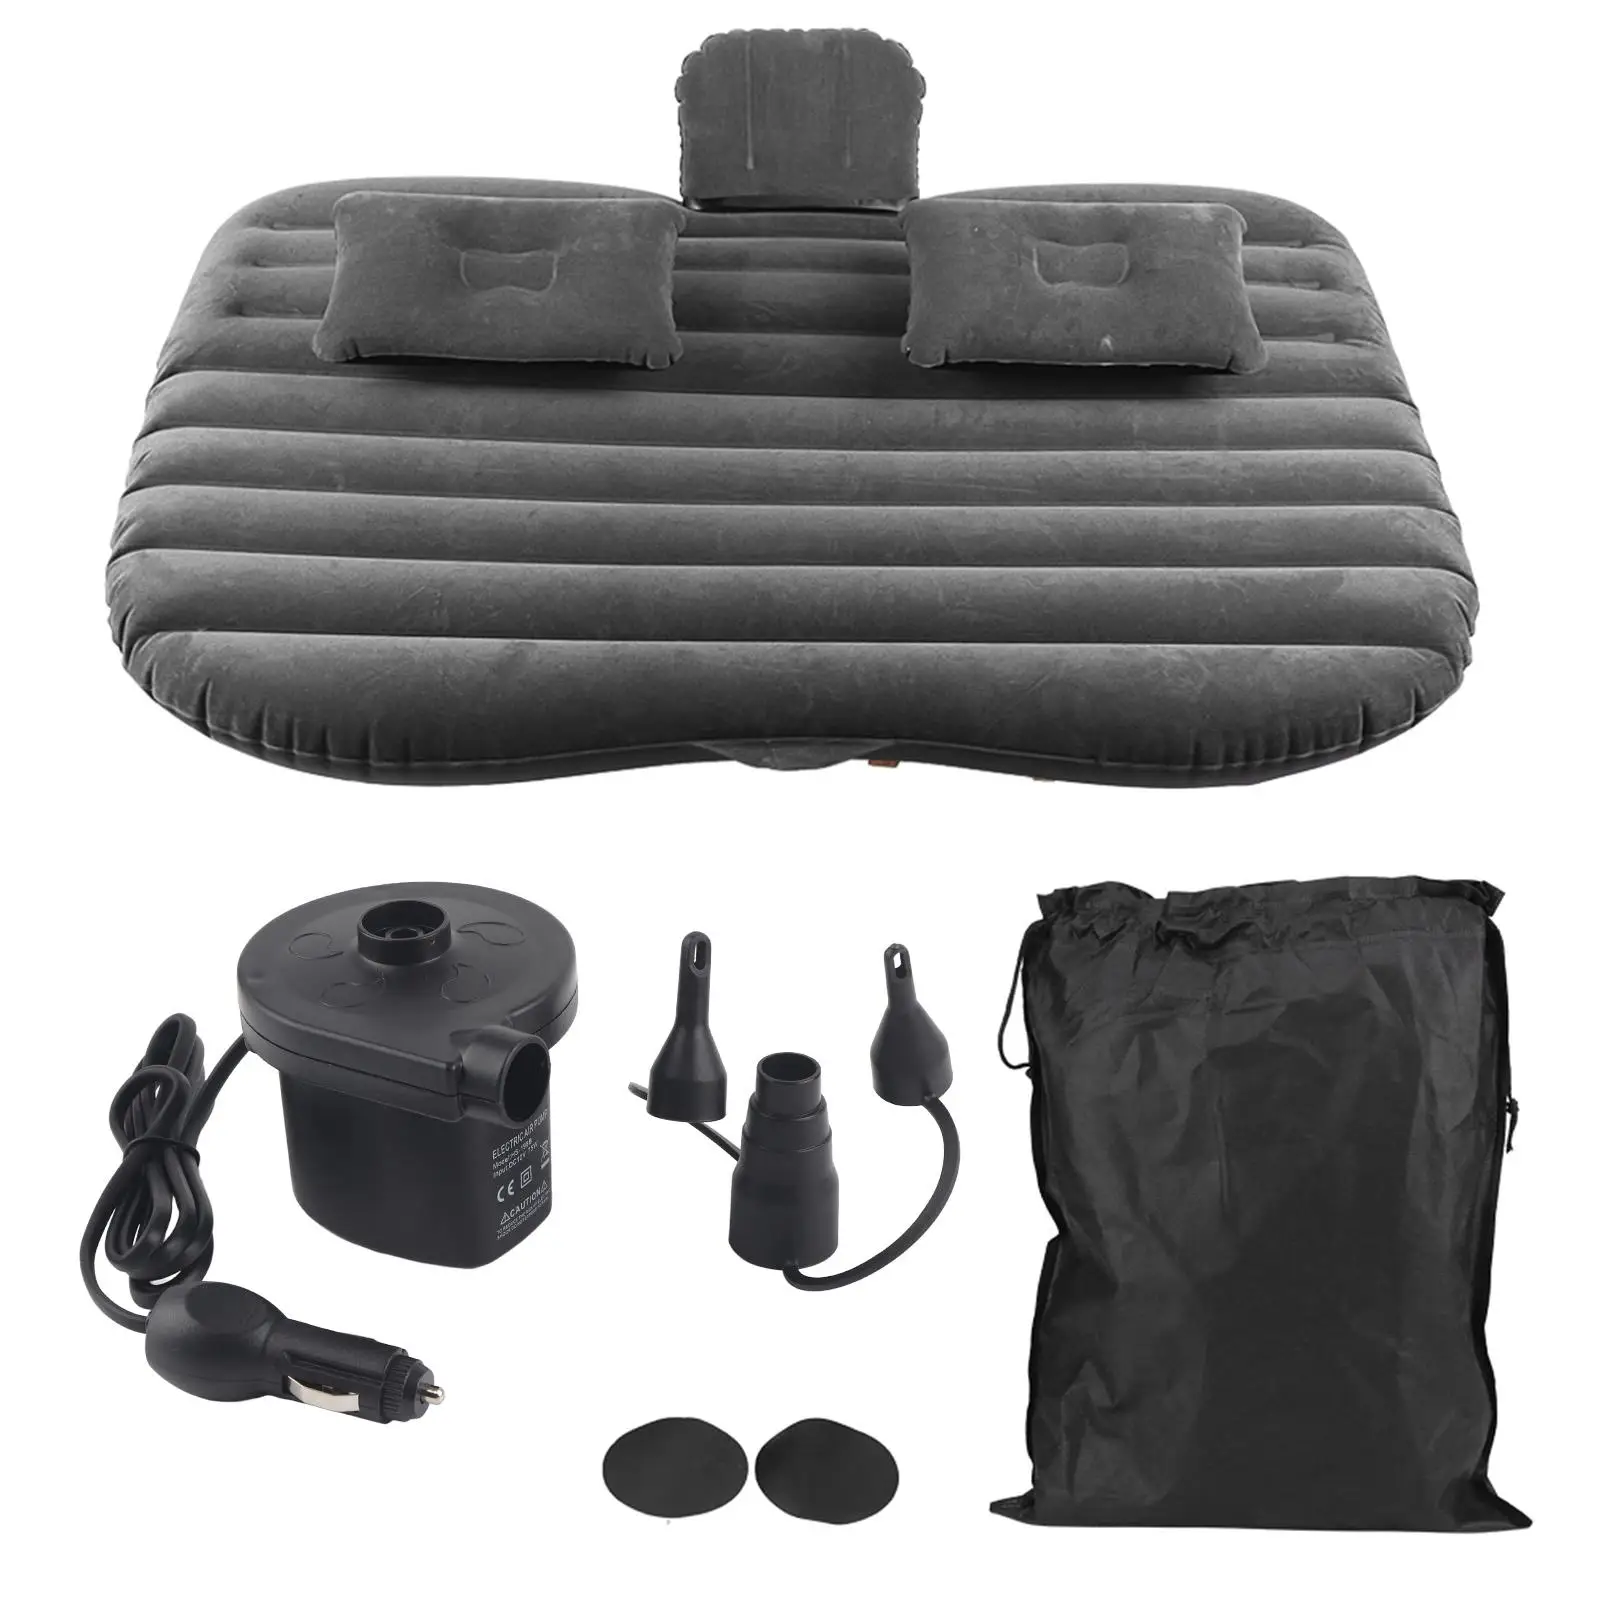 travel-camping-resting-inflatable-car-bed-mattress-sofa-airbed-for-comfortable-sleep-portable-car-accessories